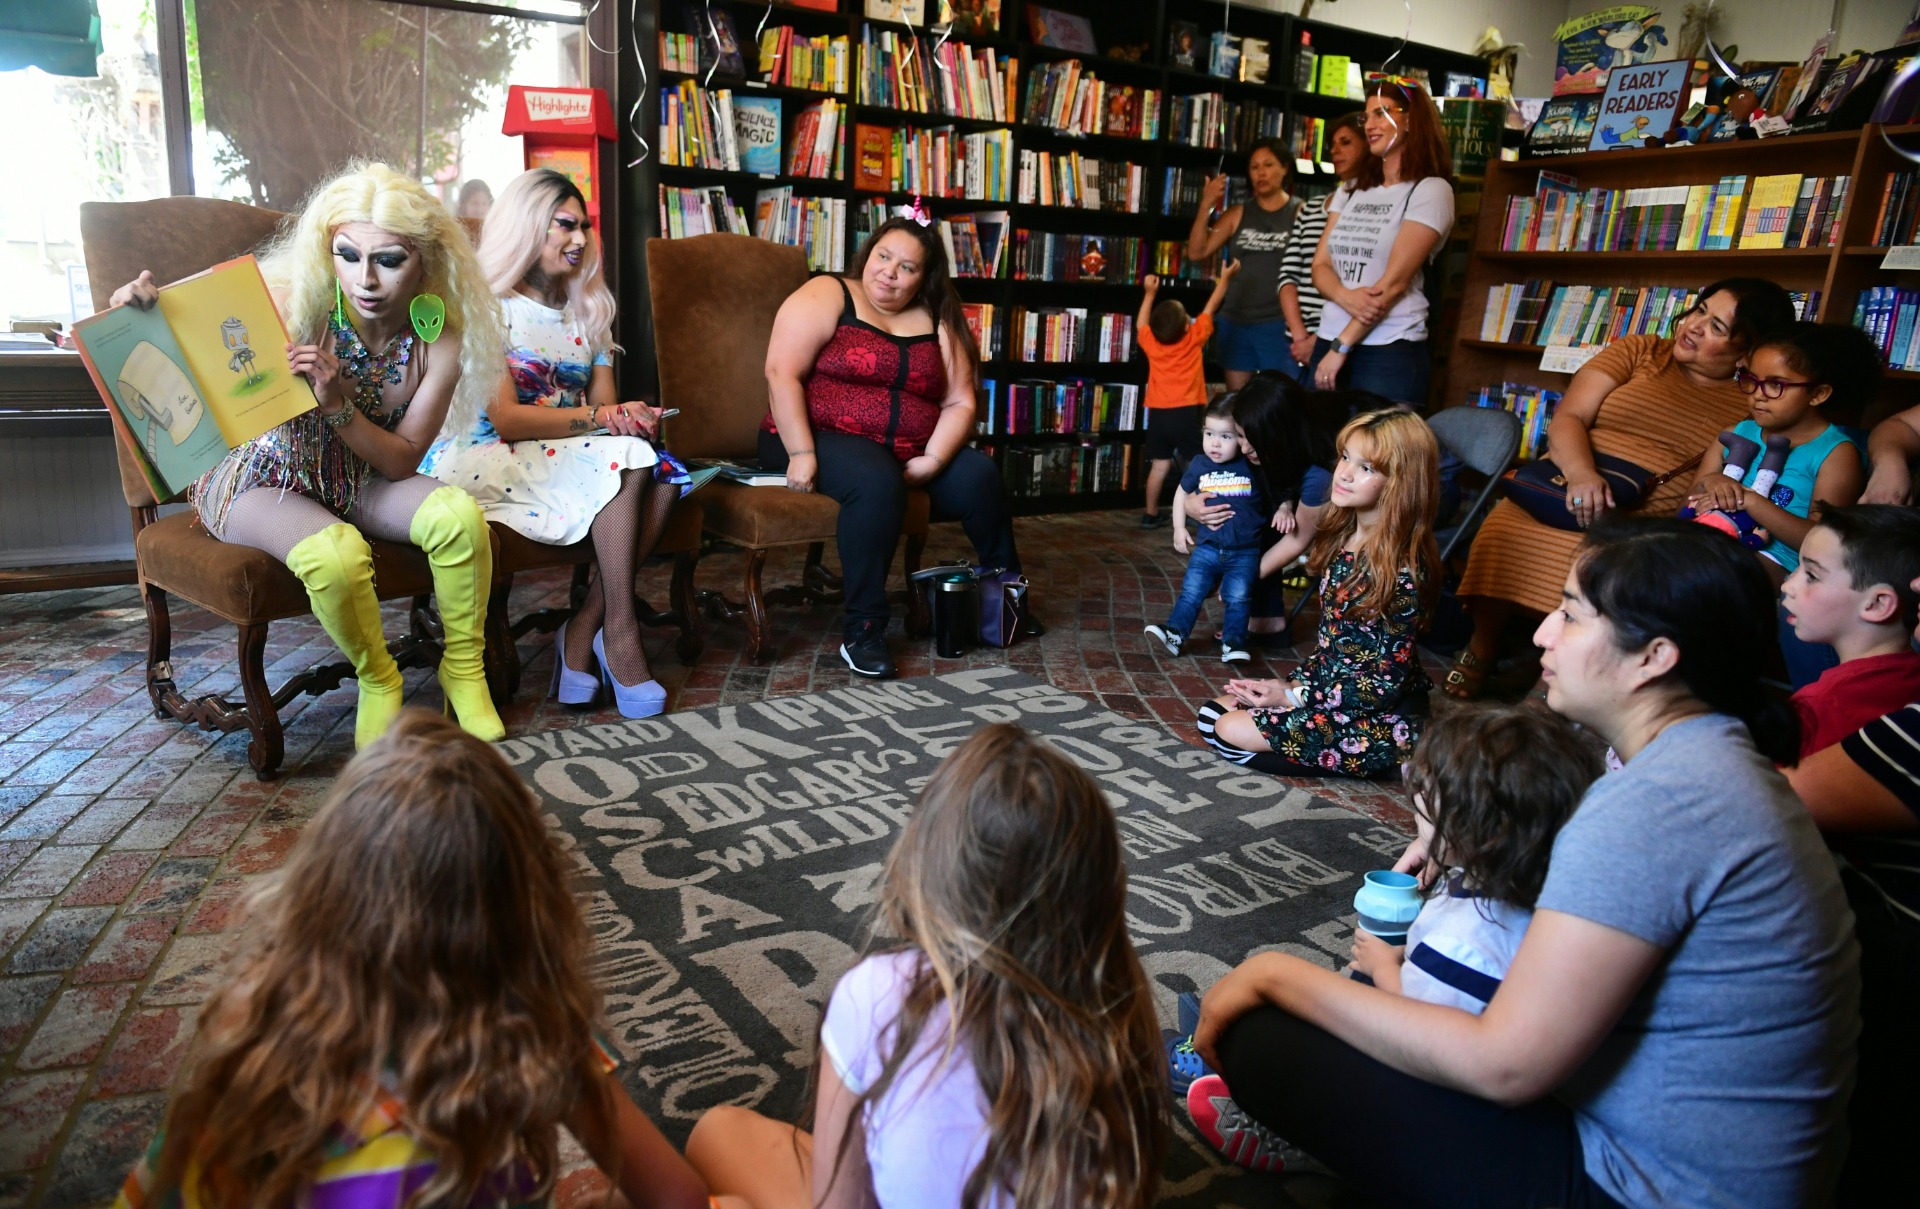 A drag queen, left, holds open a storybook and reads for children sitting in a circle around them inside a library.